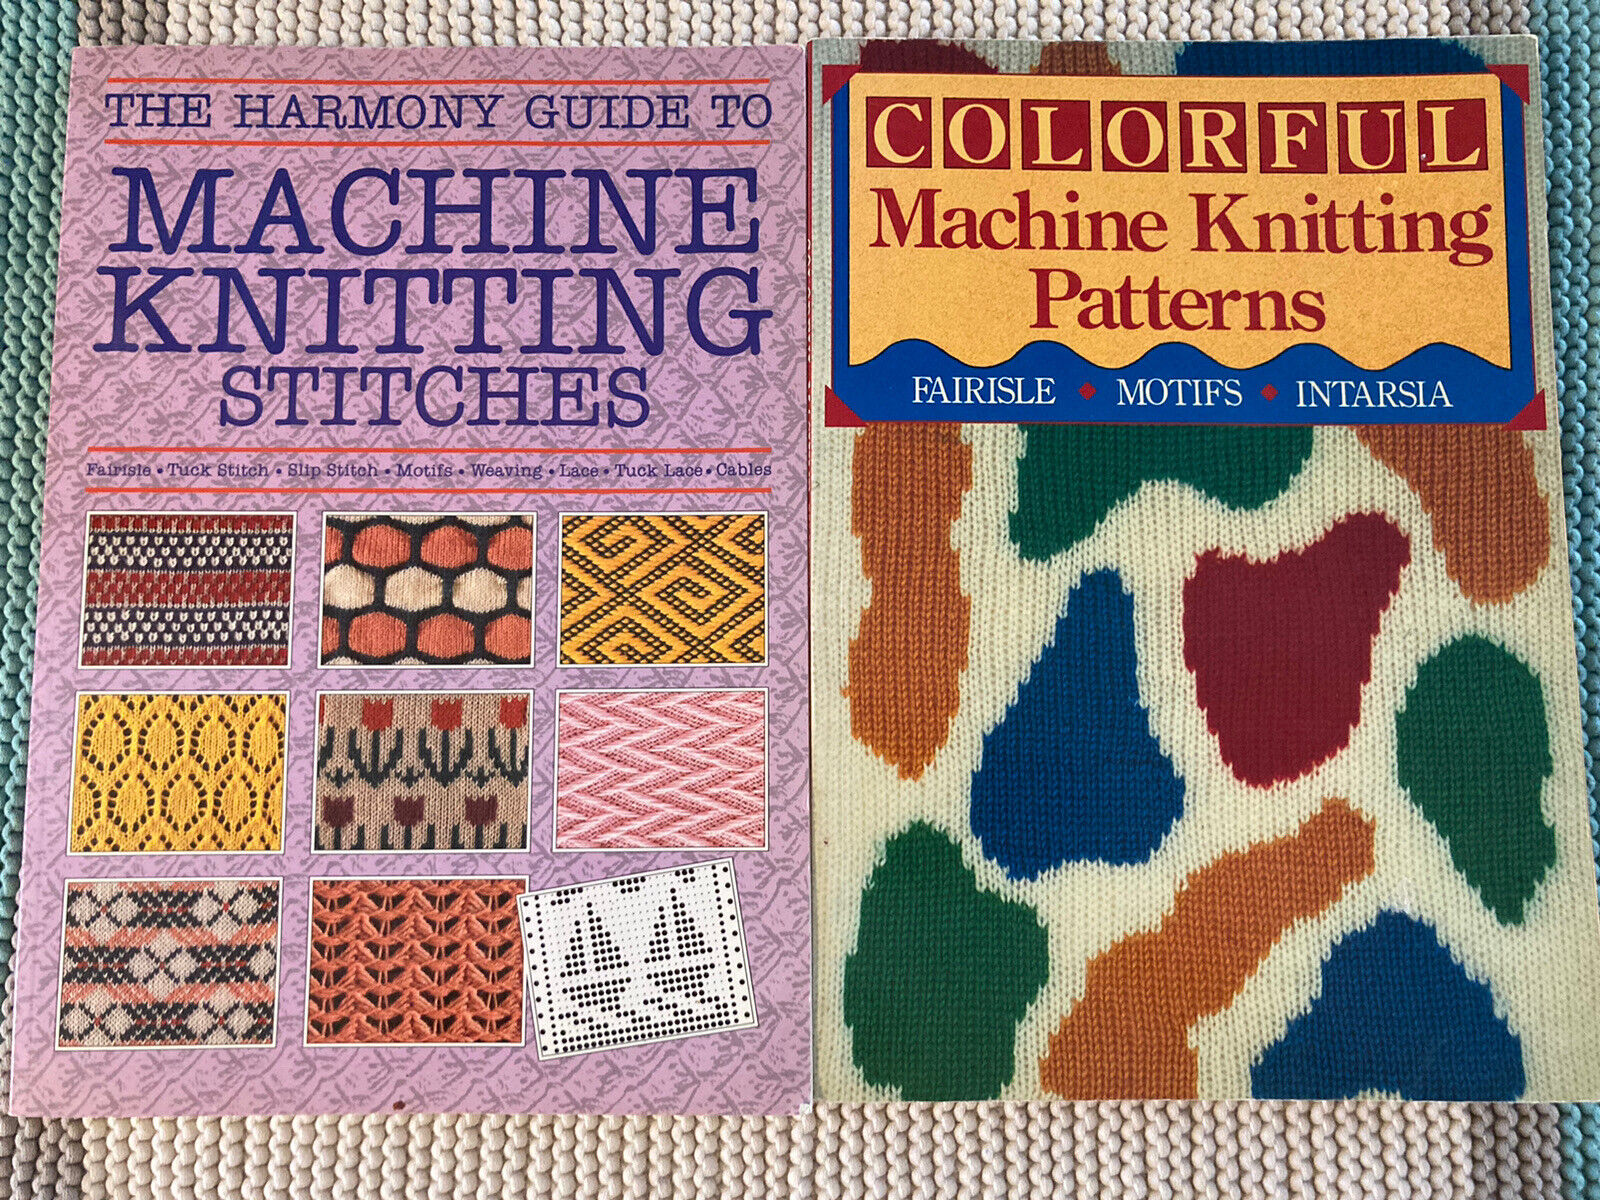 Harmony Guide To Machine Knitting Stitches & Colorful Patterns Barbara Devaney